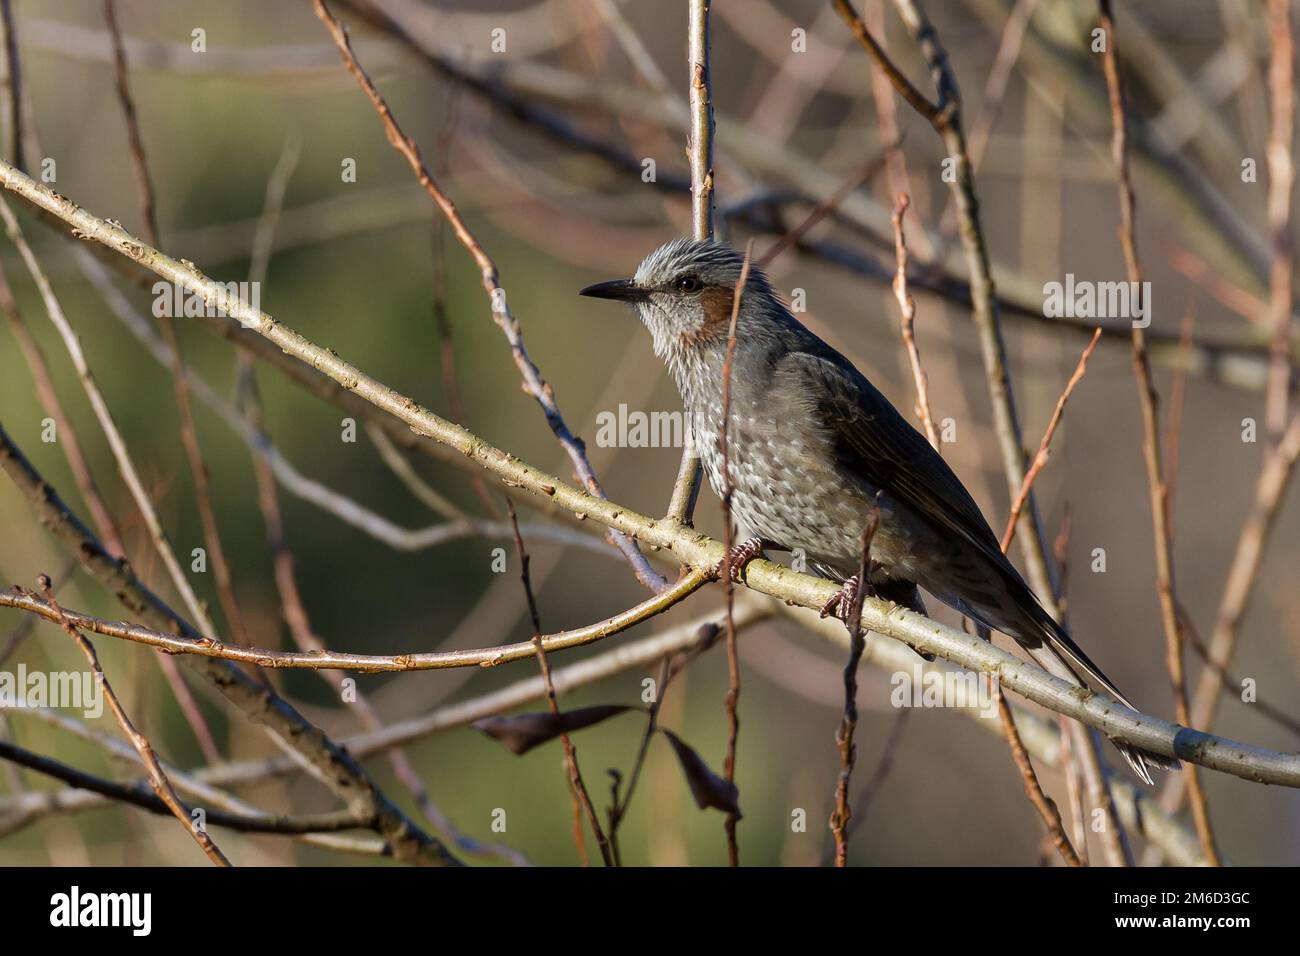 A brown-eared bulbul bird (Hypsipetes amaurotis) peched in a tree in a park in Kanagawa, Japan. Stock Photo